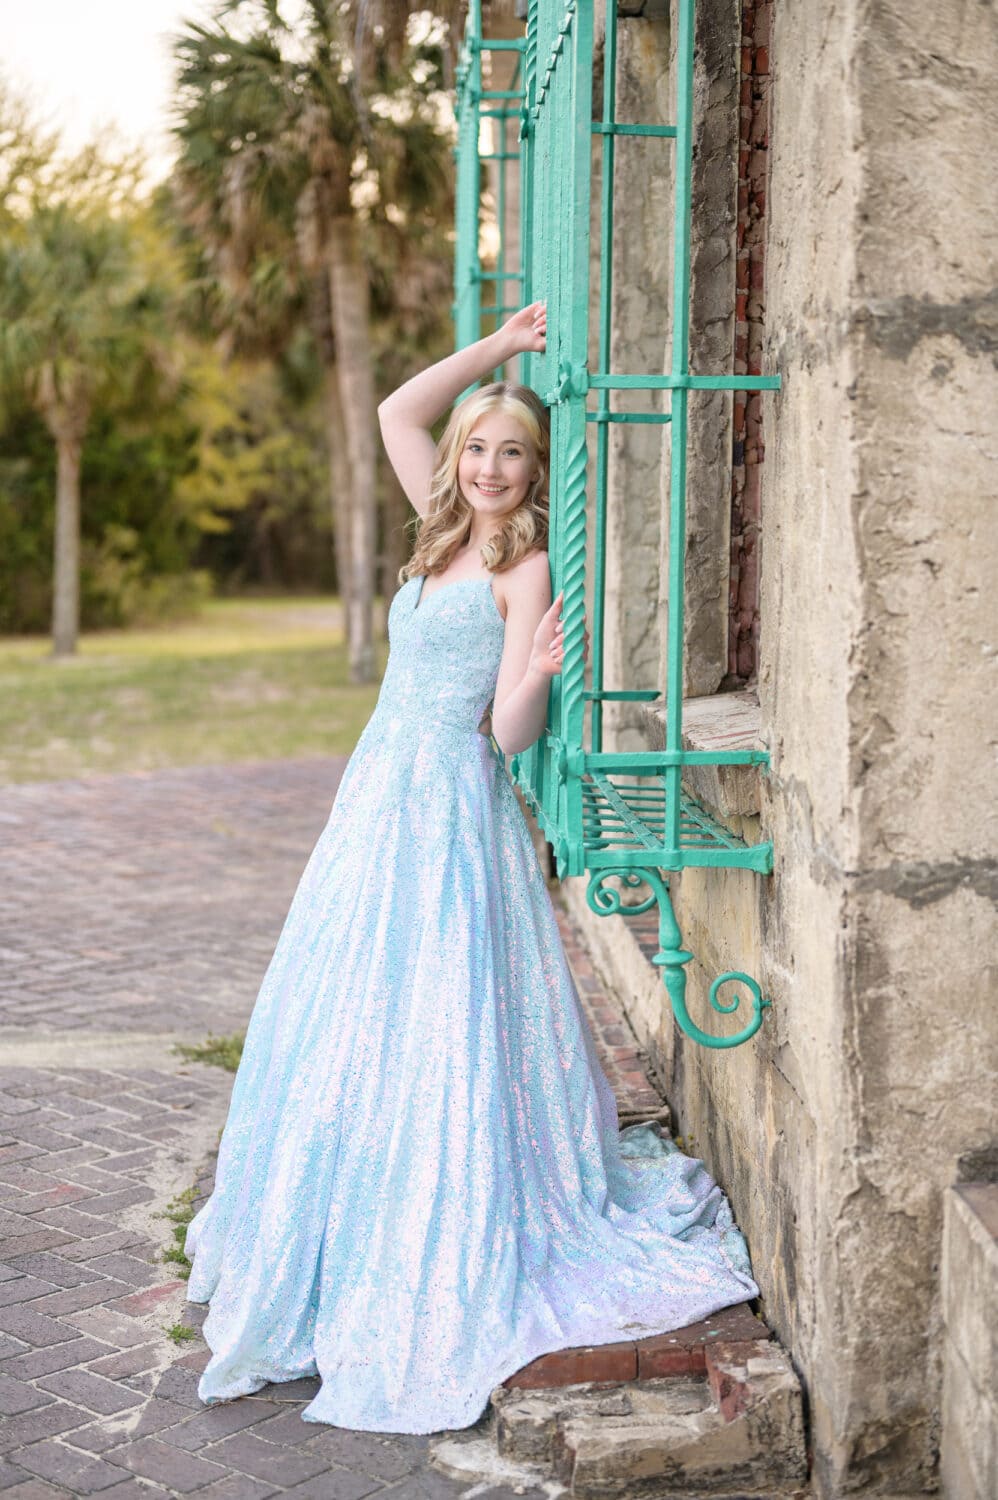 Prom portraits by the castle window - Huntington Beach State Park